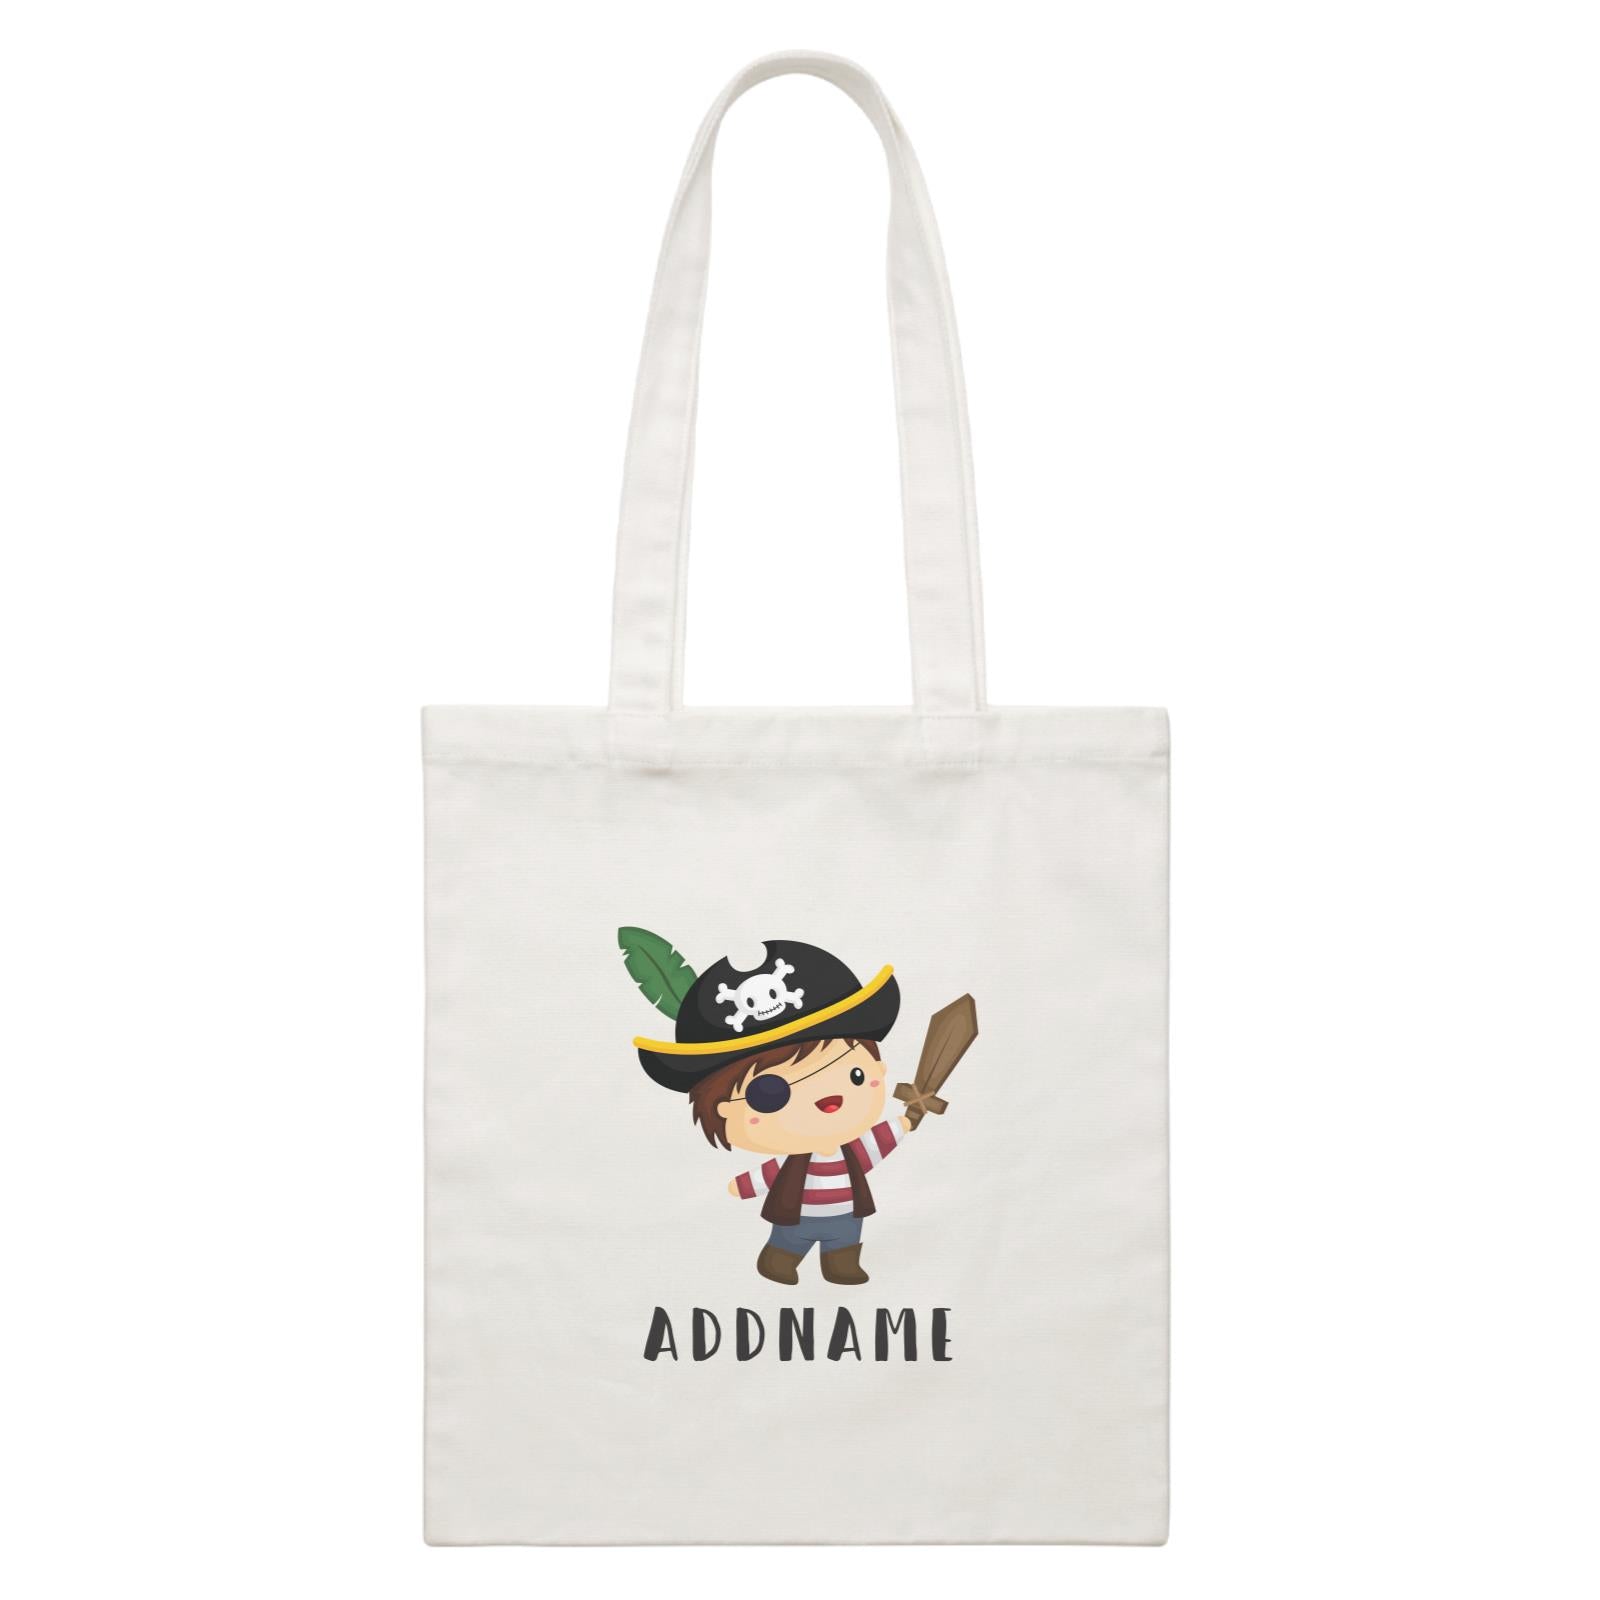 Birthday Pirate Captain Boy Playing Wodden Sword Addname White Canvas Bag